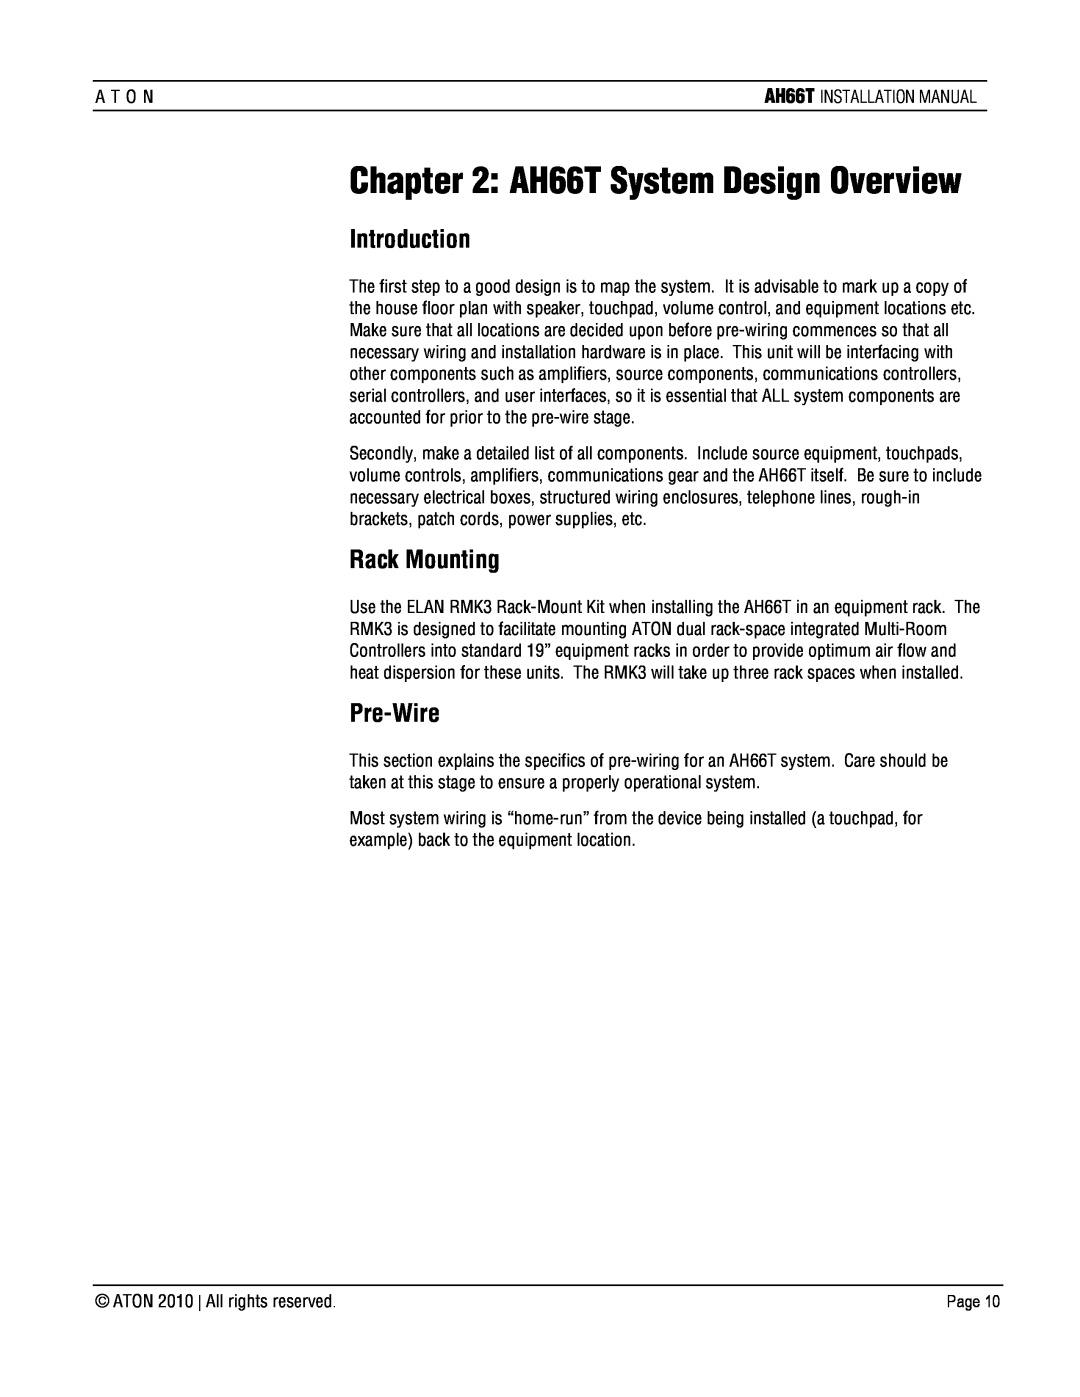 ATON AH66T-KT installation manual AH66T System Design Overview, Introduction, Rack Mounting, Pre-Wire 